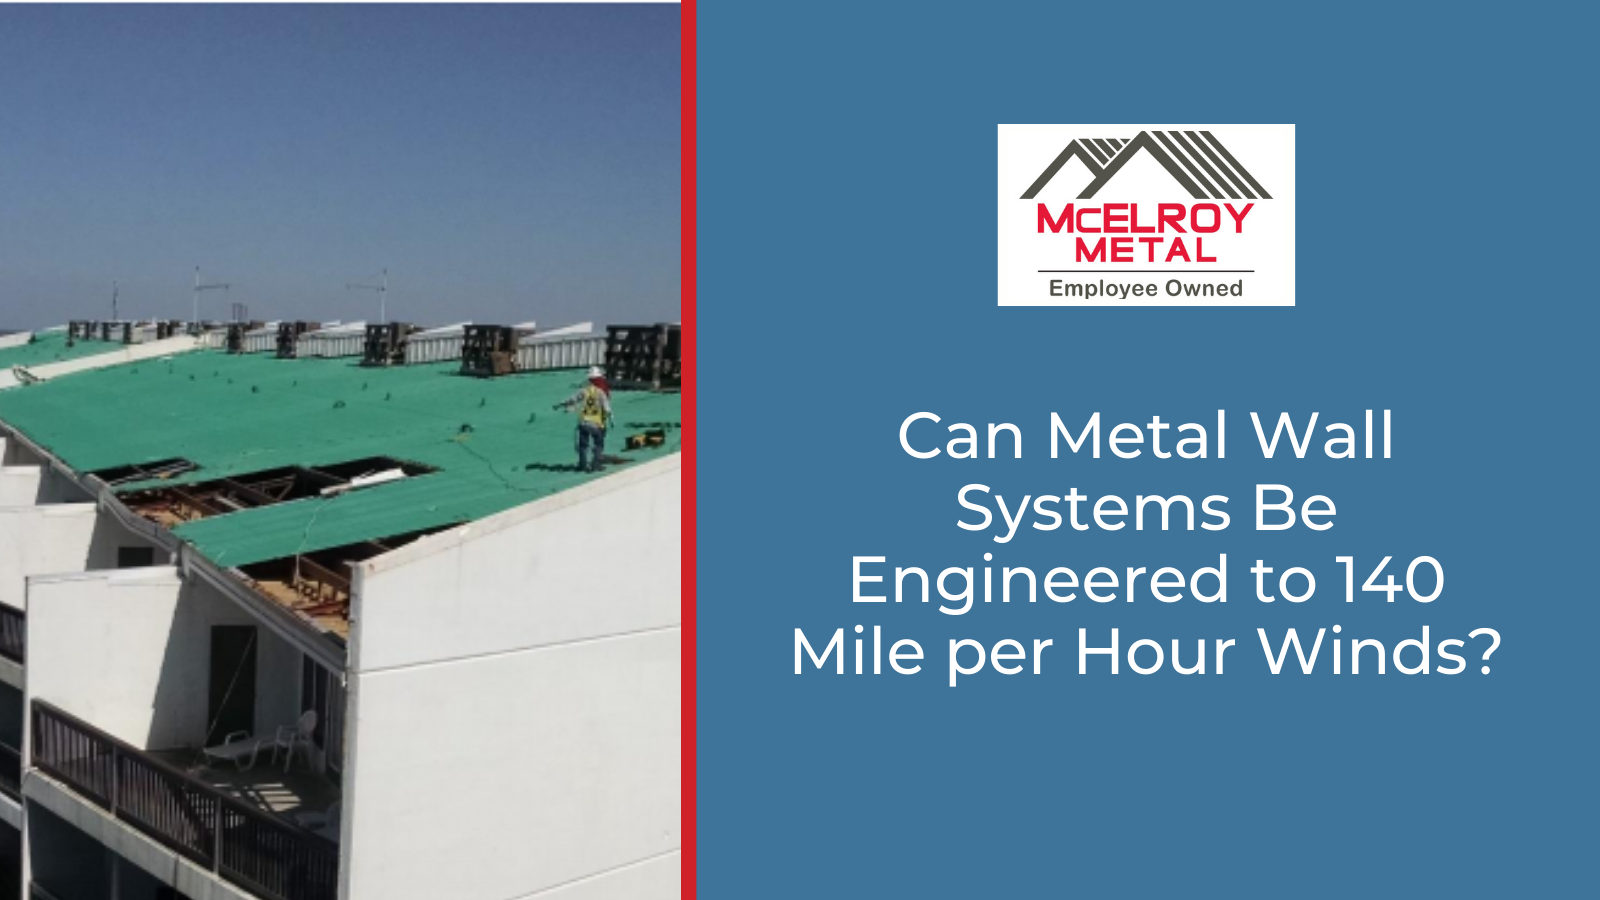 Can Metal Wall Systems Be Engineered to 140 Mile per Hour Winds?